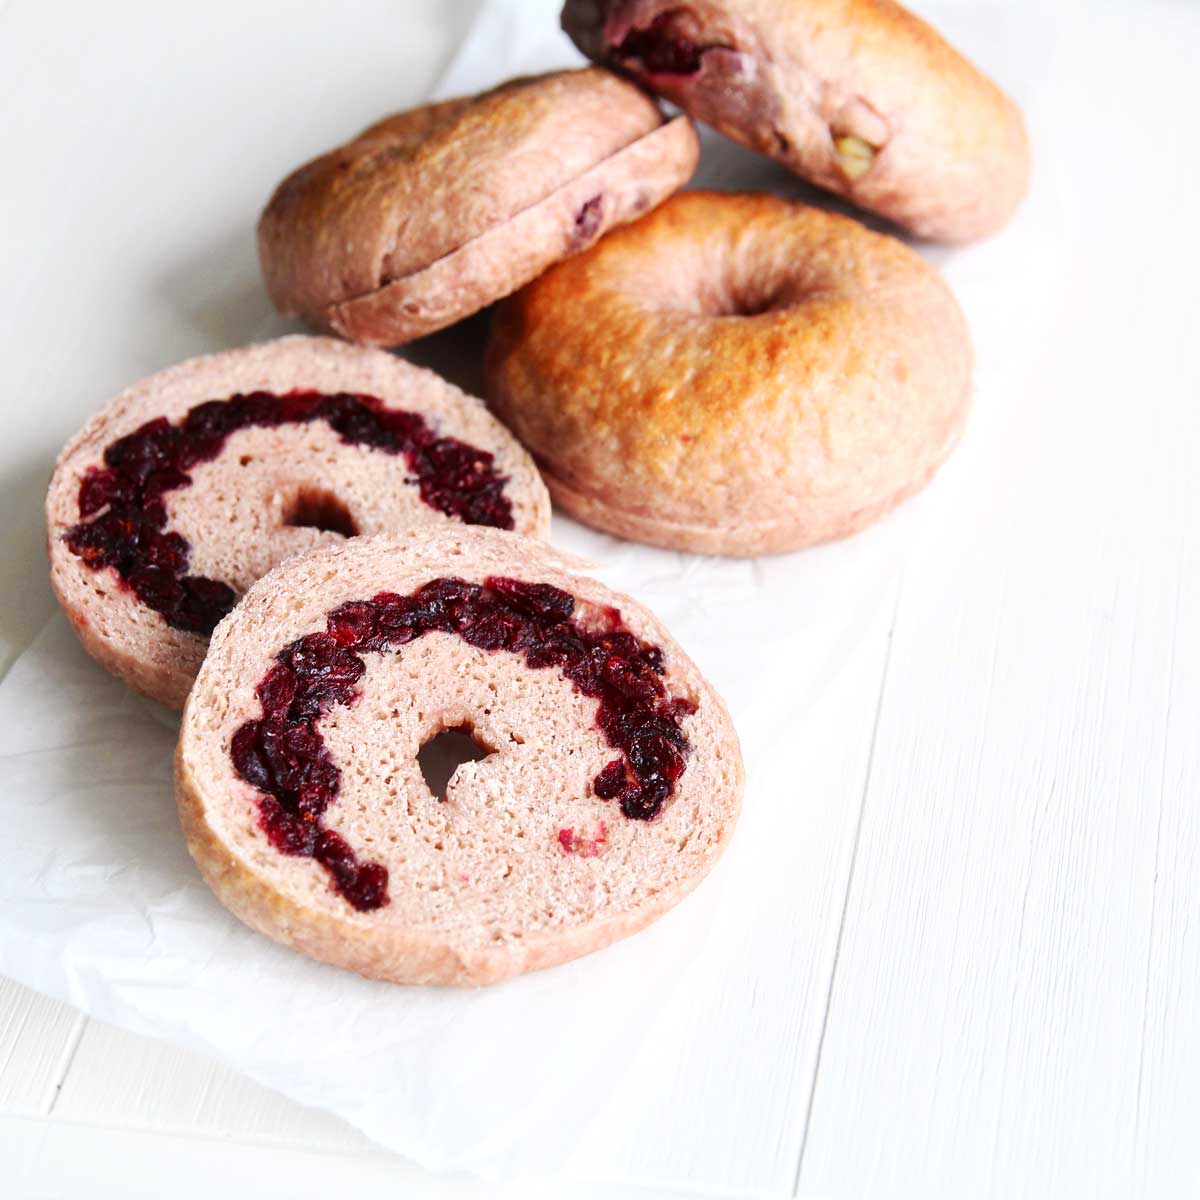 How To Make Stuffed Cranberry Bagels With Canned Cranberry Sauce - Peanut Butter Banana Bread